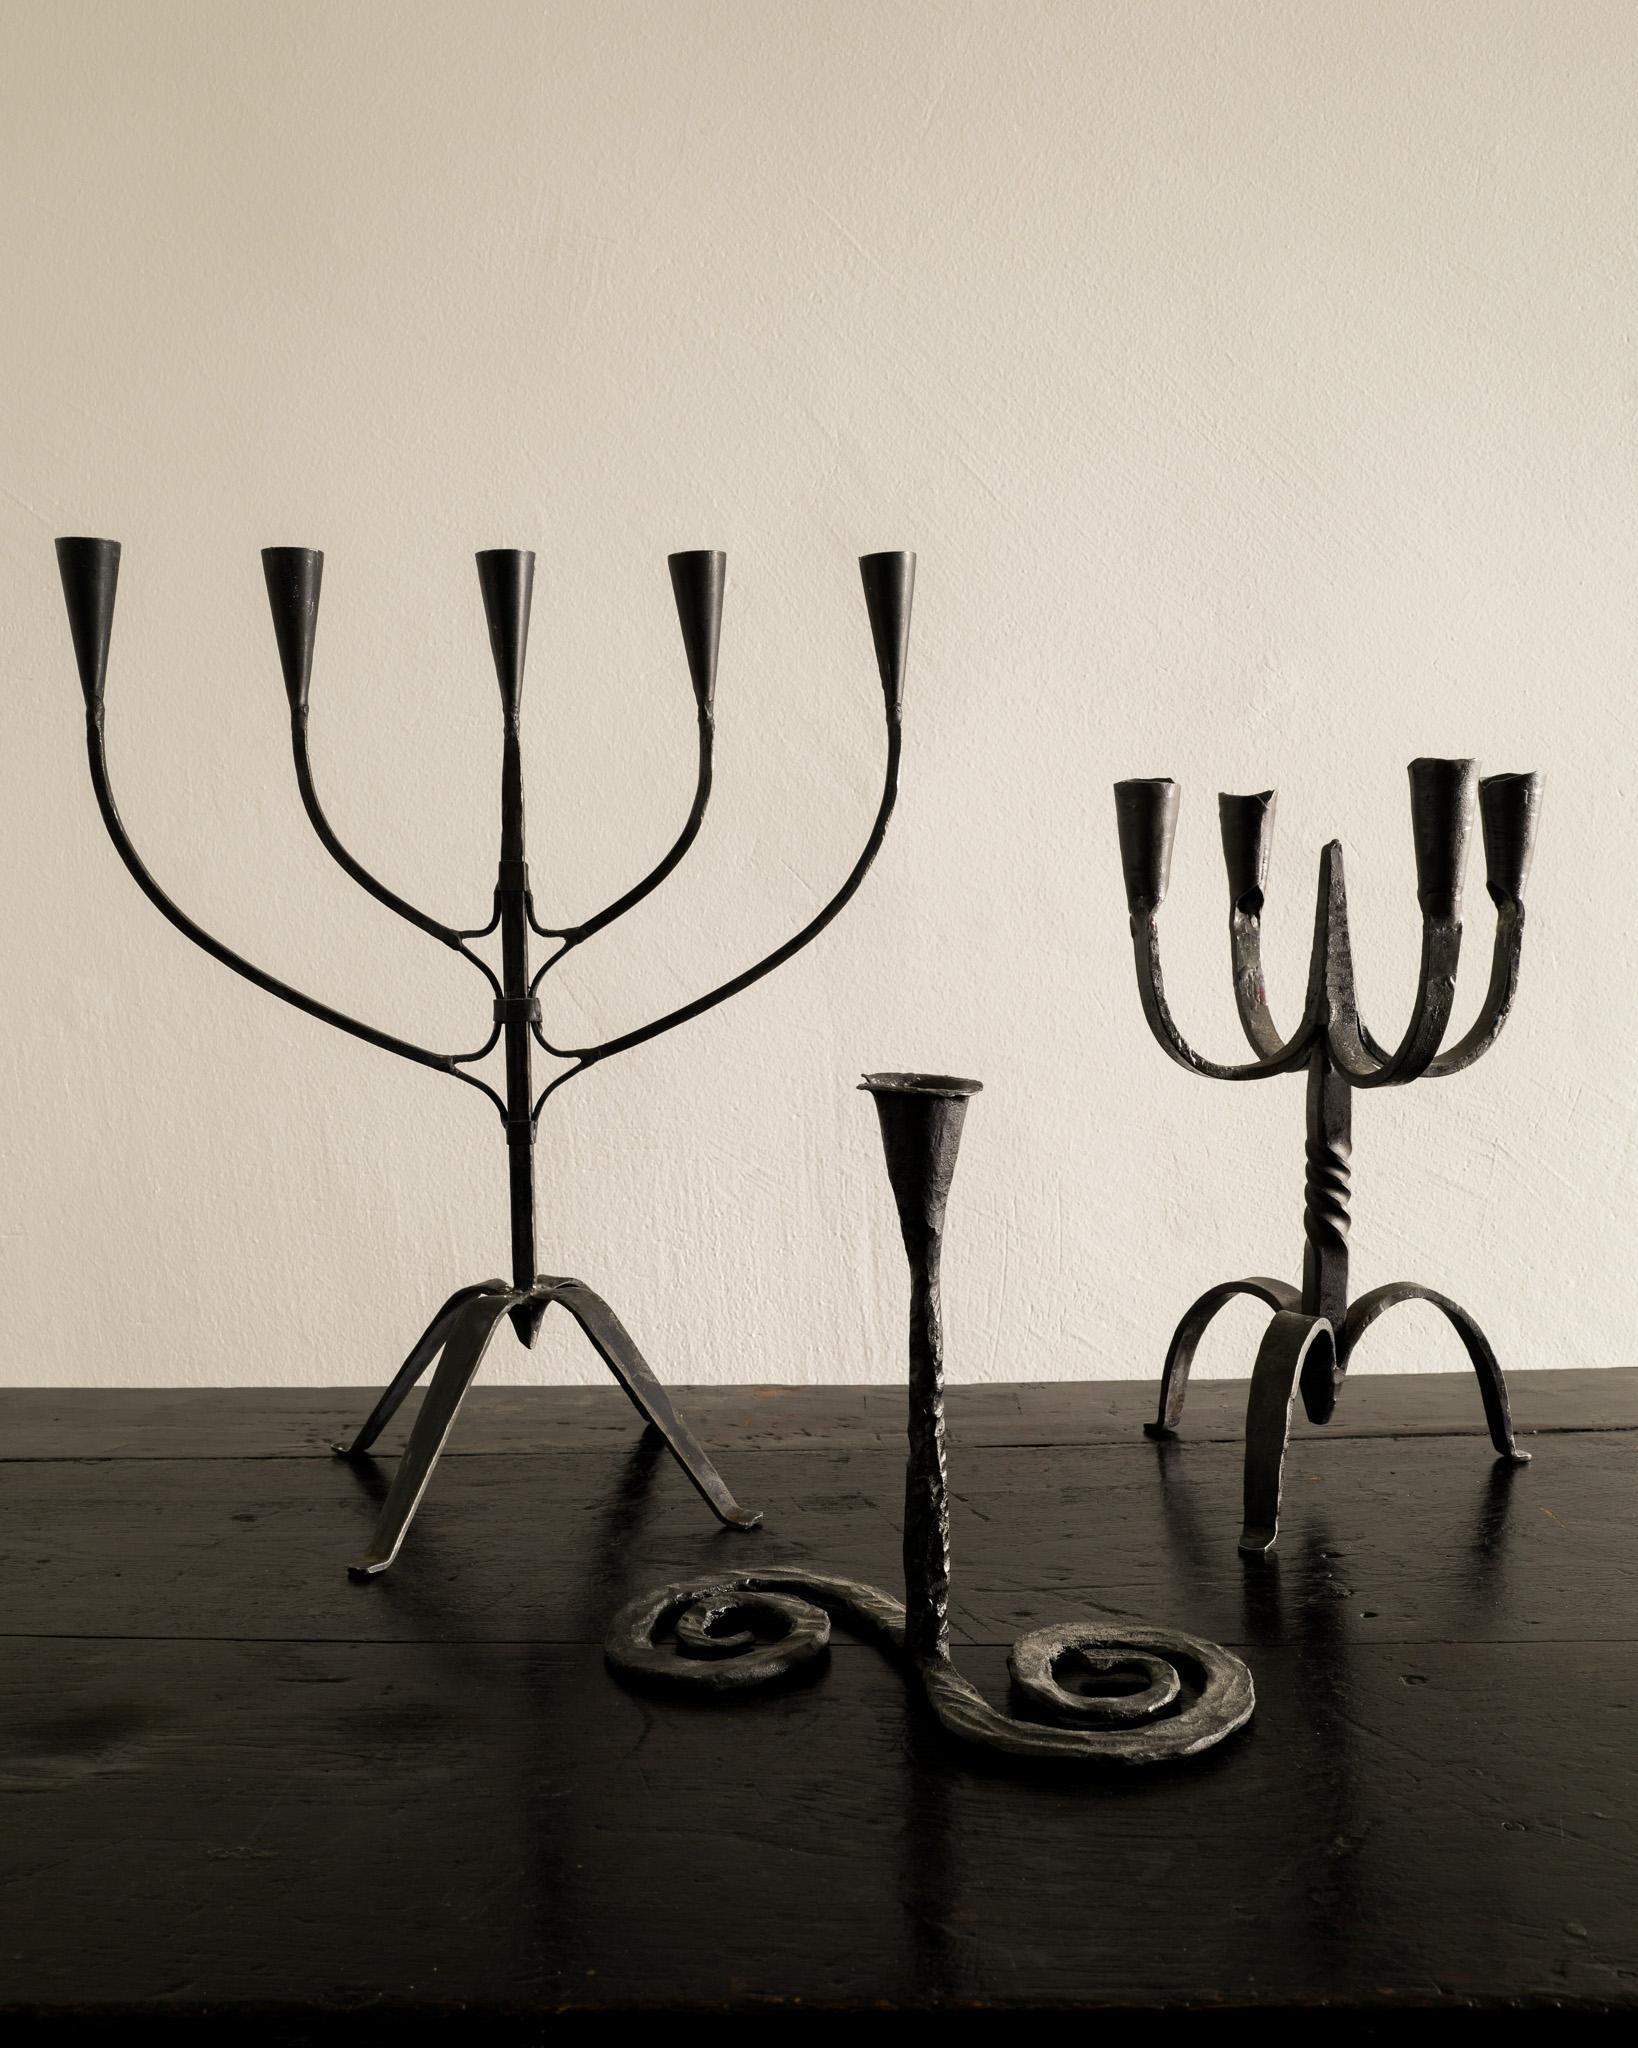 Rare set of three antique sculptural candleholders in black cast iron produced in Sweden late 1800s. In good original condition. 

Dimensions: 
Large: H: 41 cm / 16.15